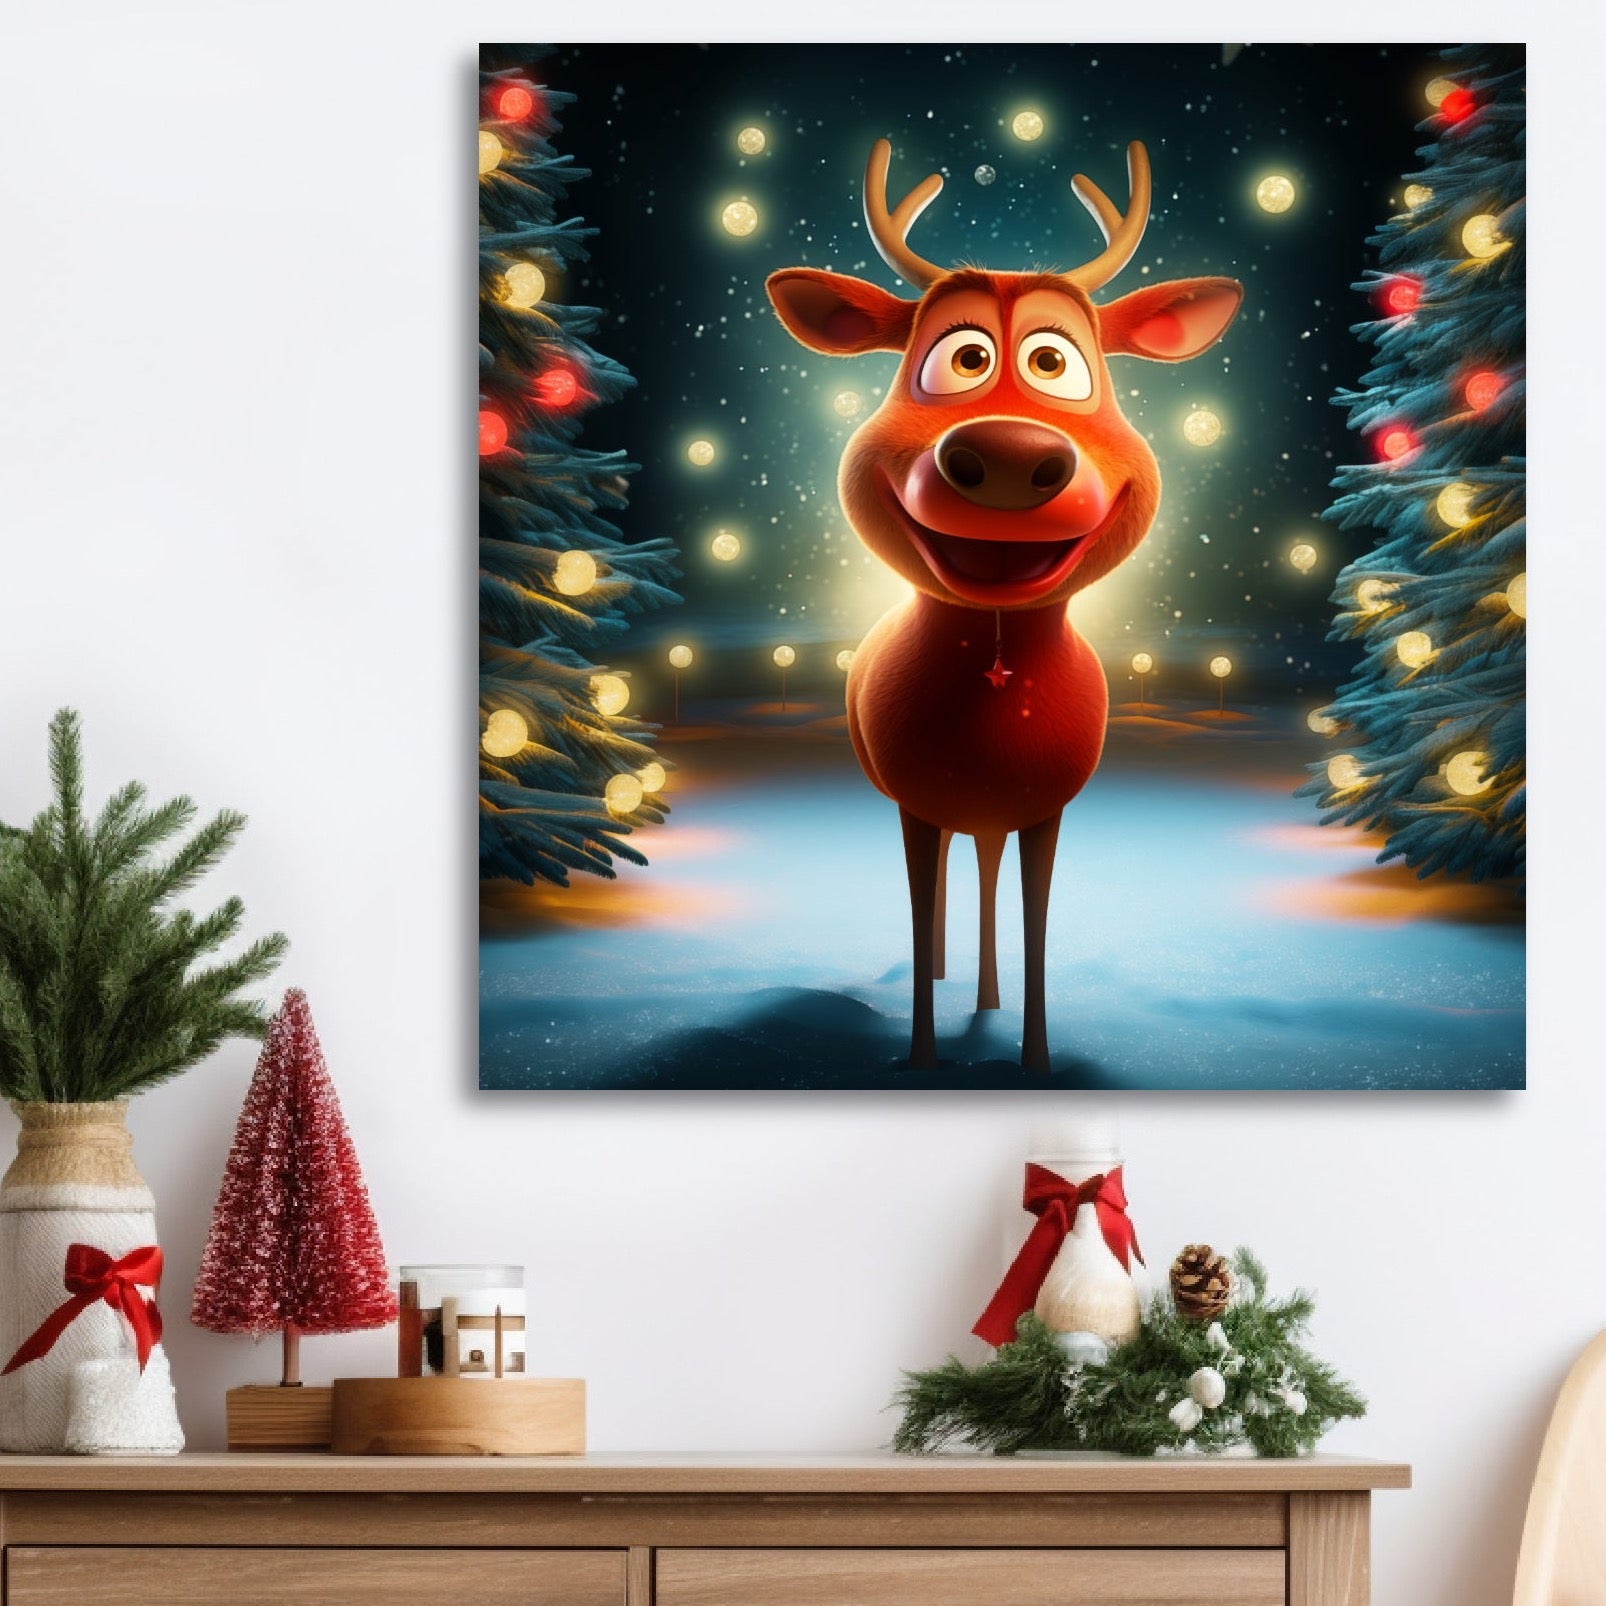 Rudolph the Red-Nosed Reindeer canvas print